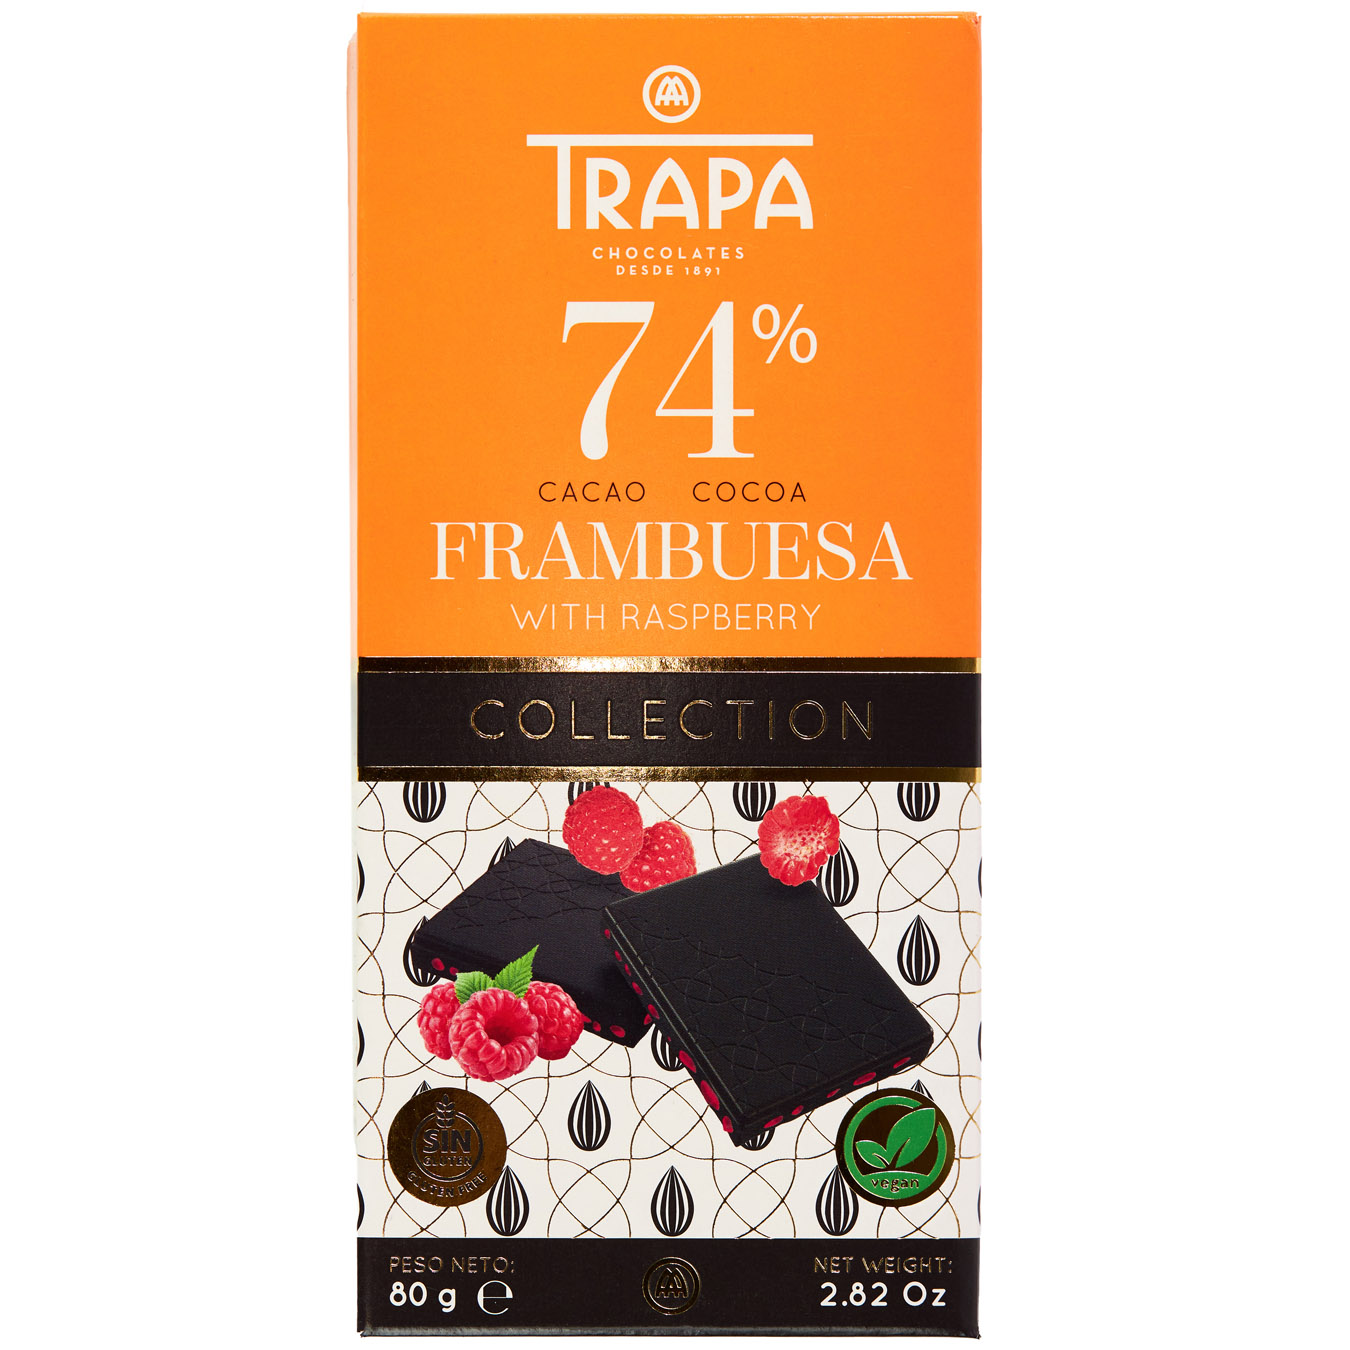 Trapa Collection black chocolate with raspberry vegan 74% 80g